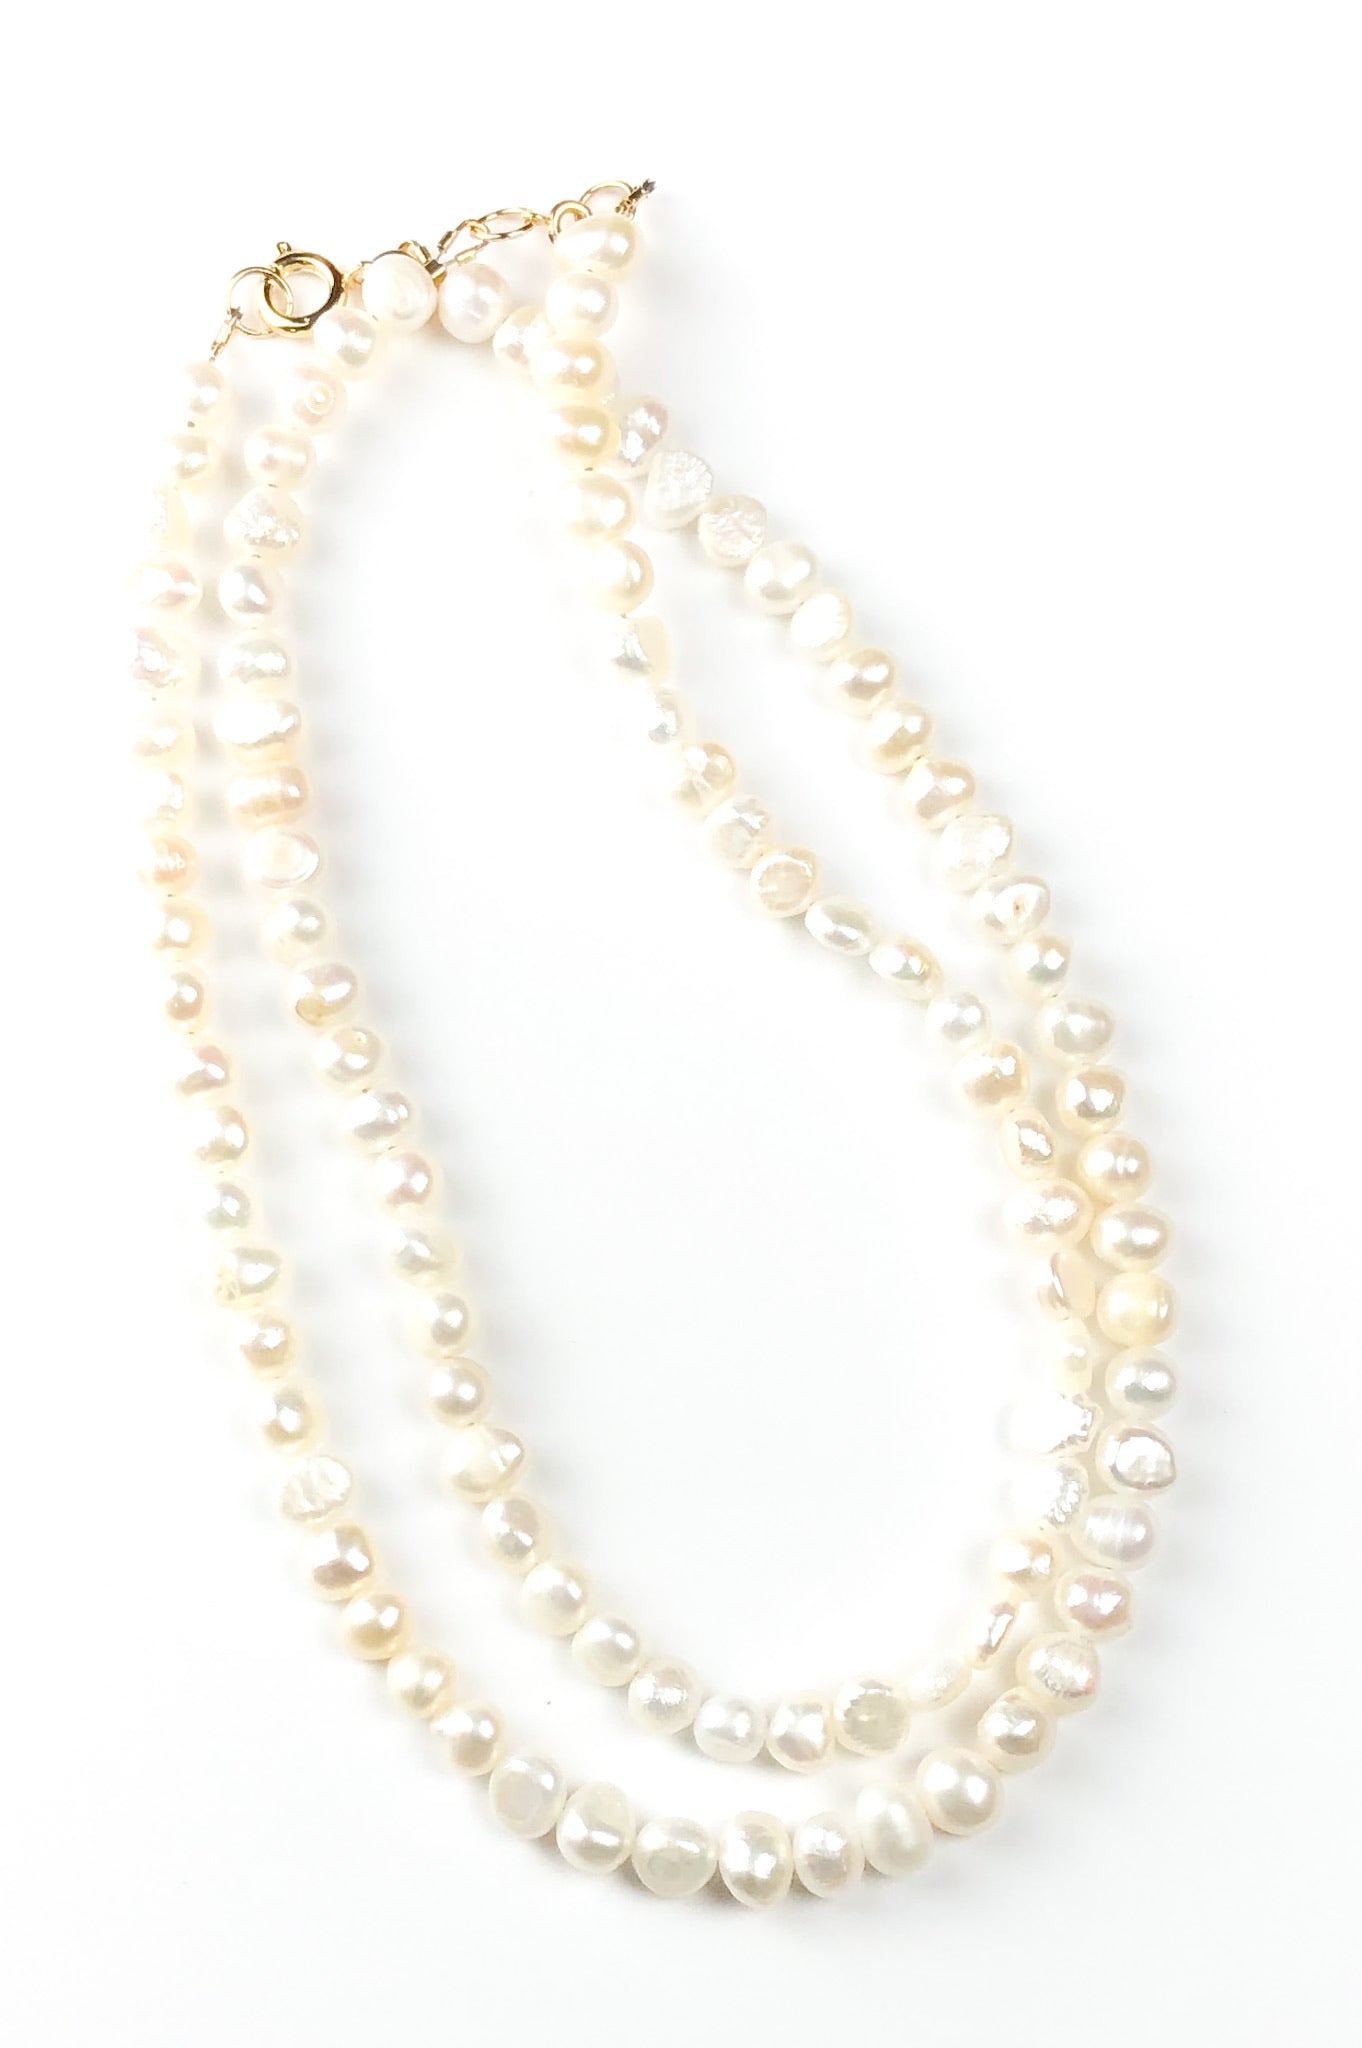 Mommy and me Freshwater Pearl Necklace set